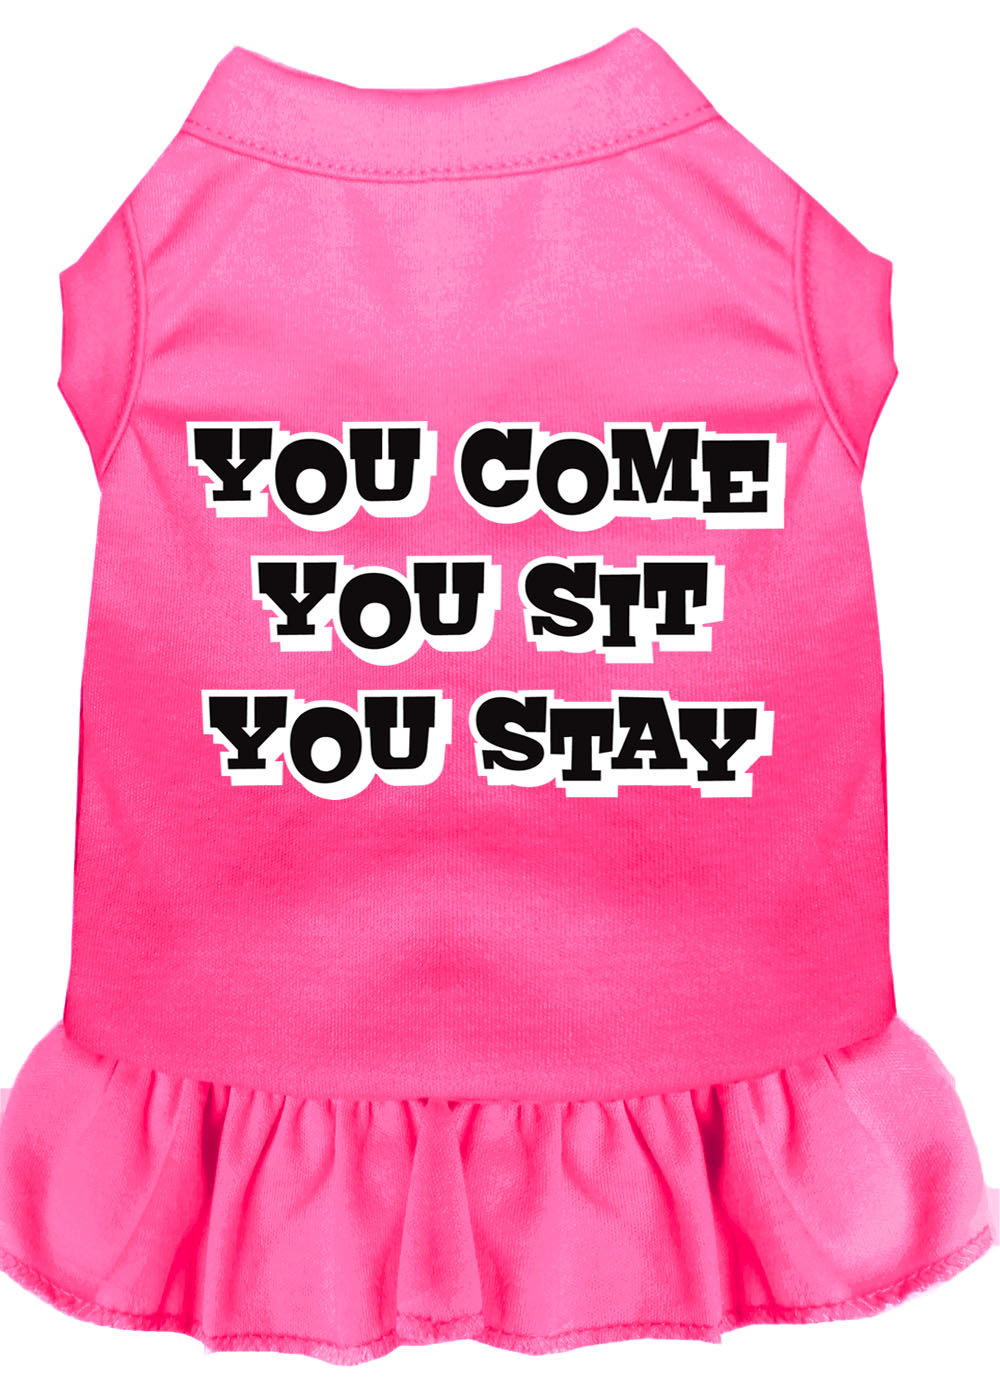 You Come, You Sit, You Stay Screen Print Dress Bright Pink Xl GreatEagleInc